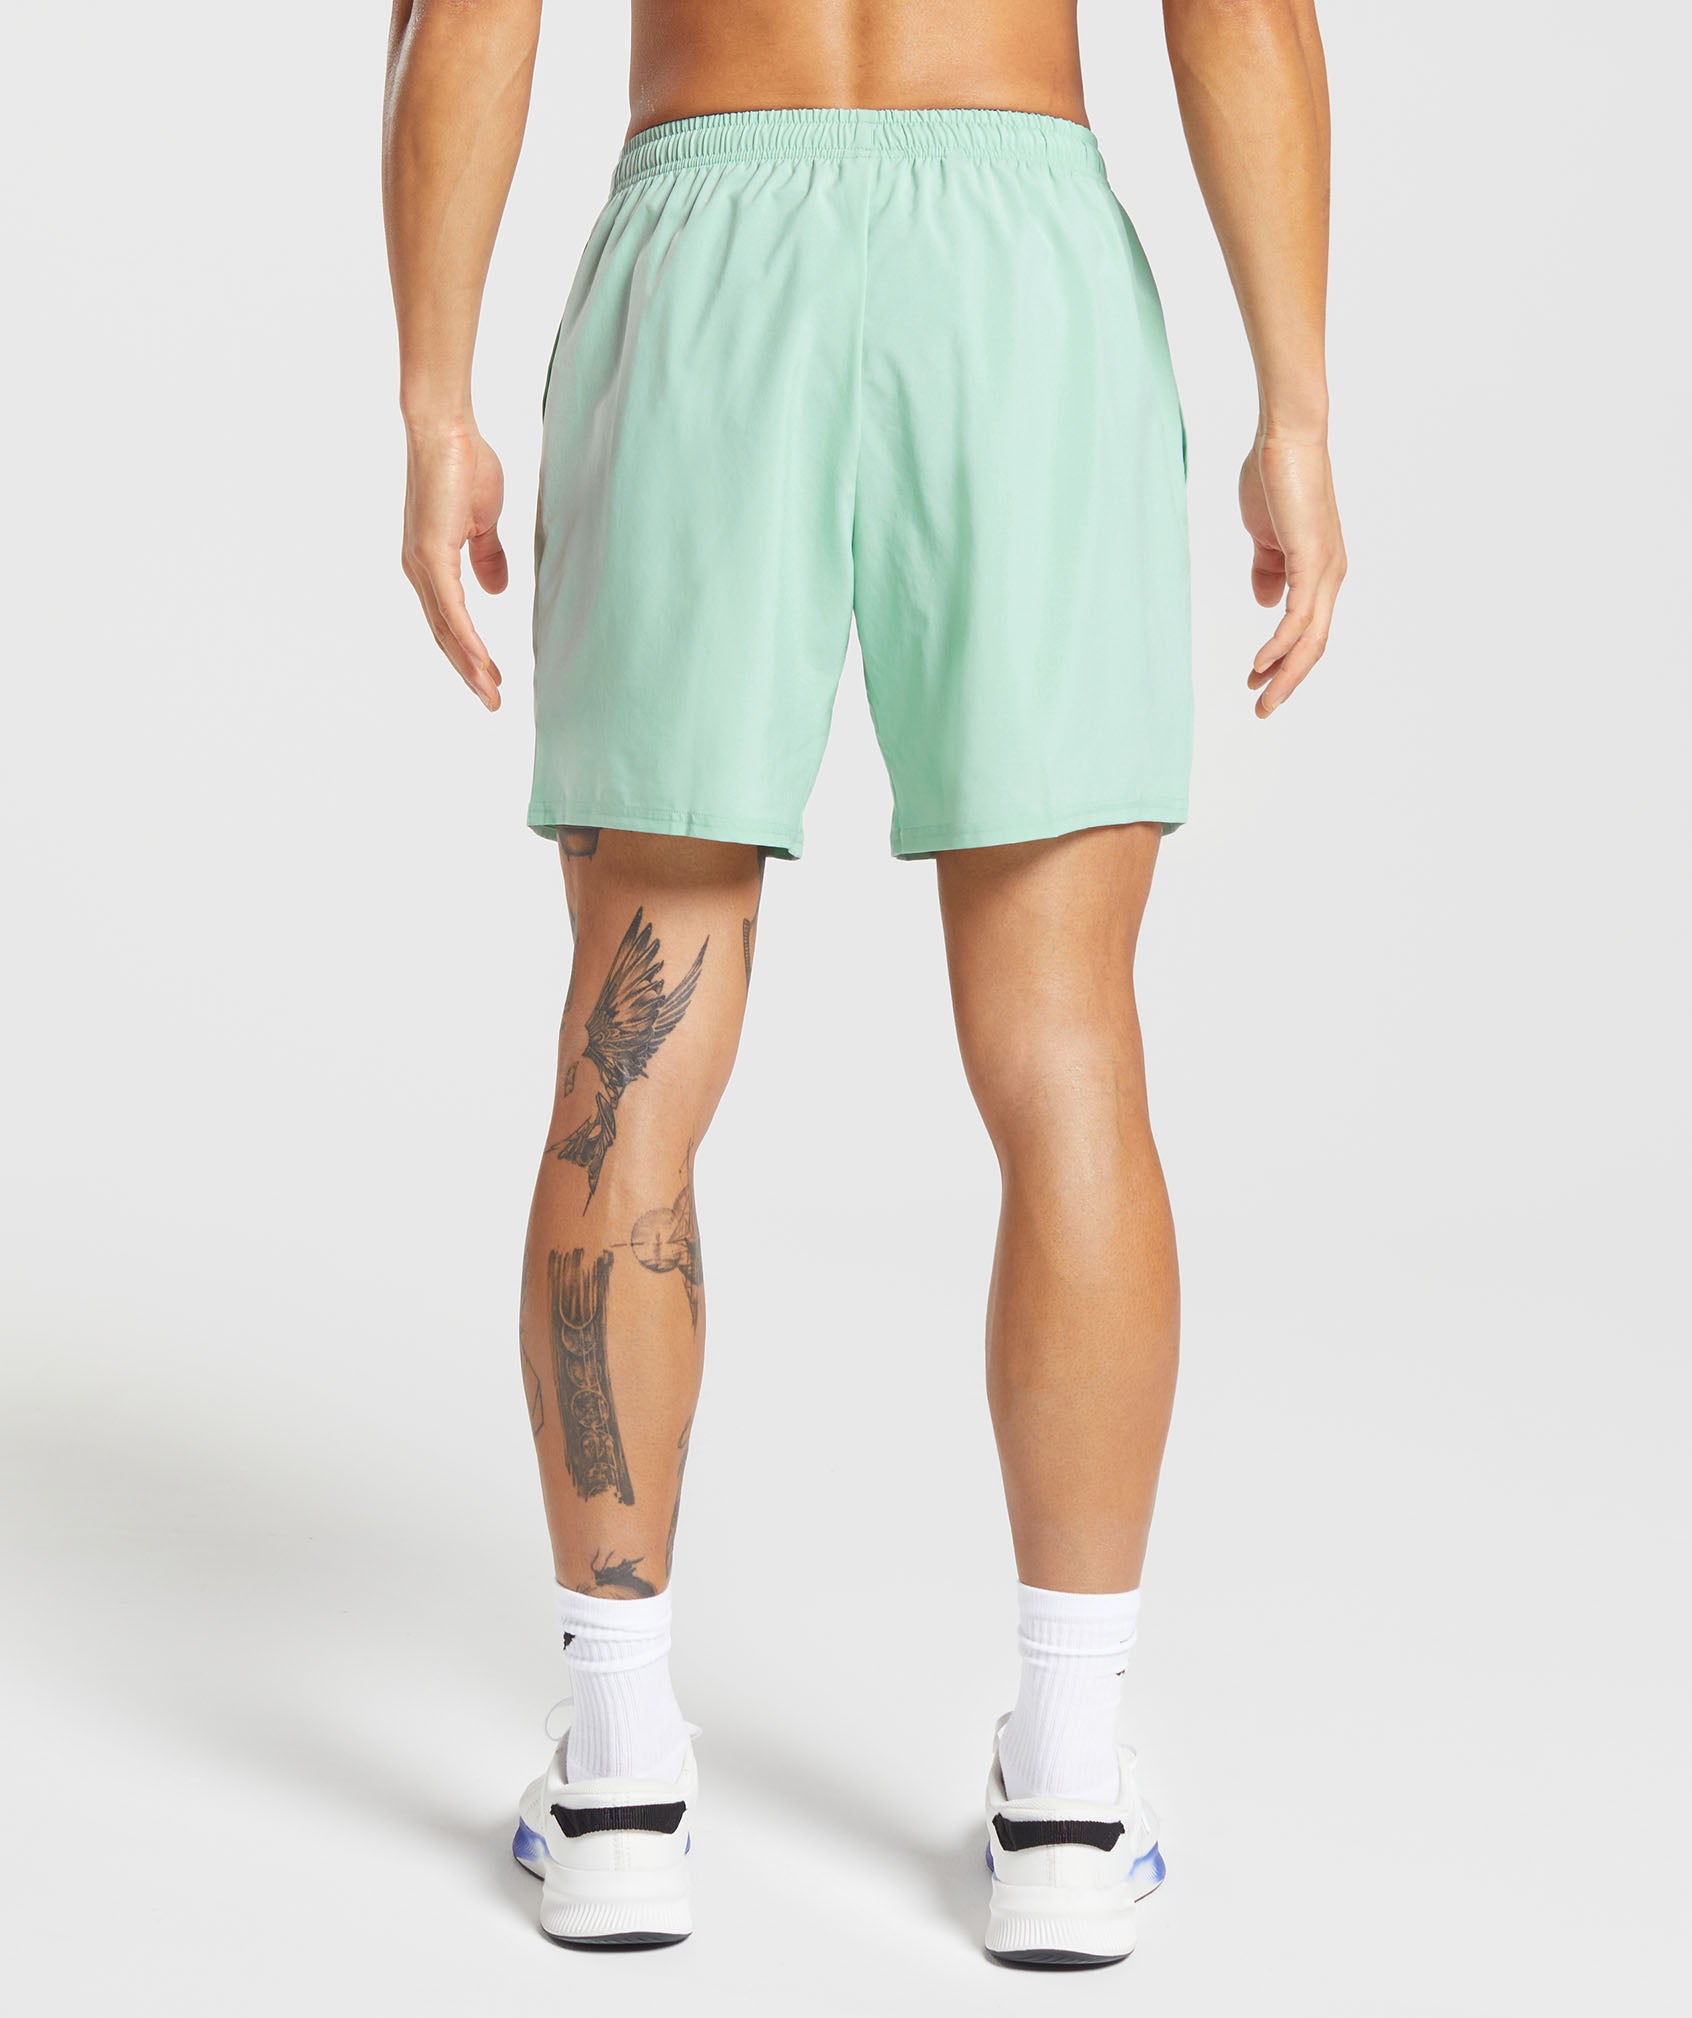 Arrival 7" Shorts in Lido Green - view 2